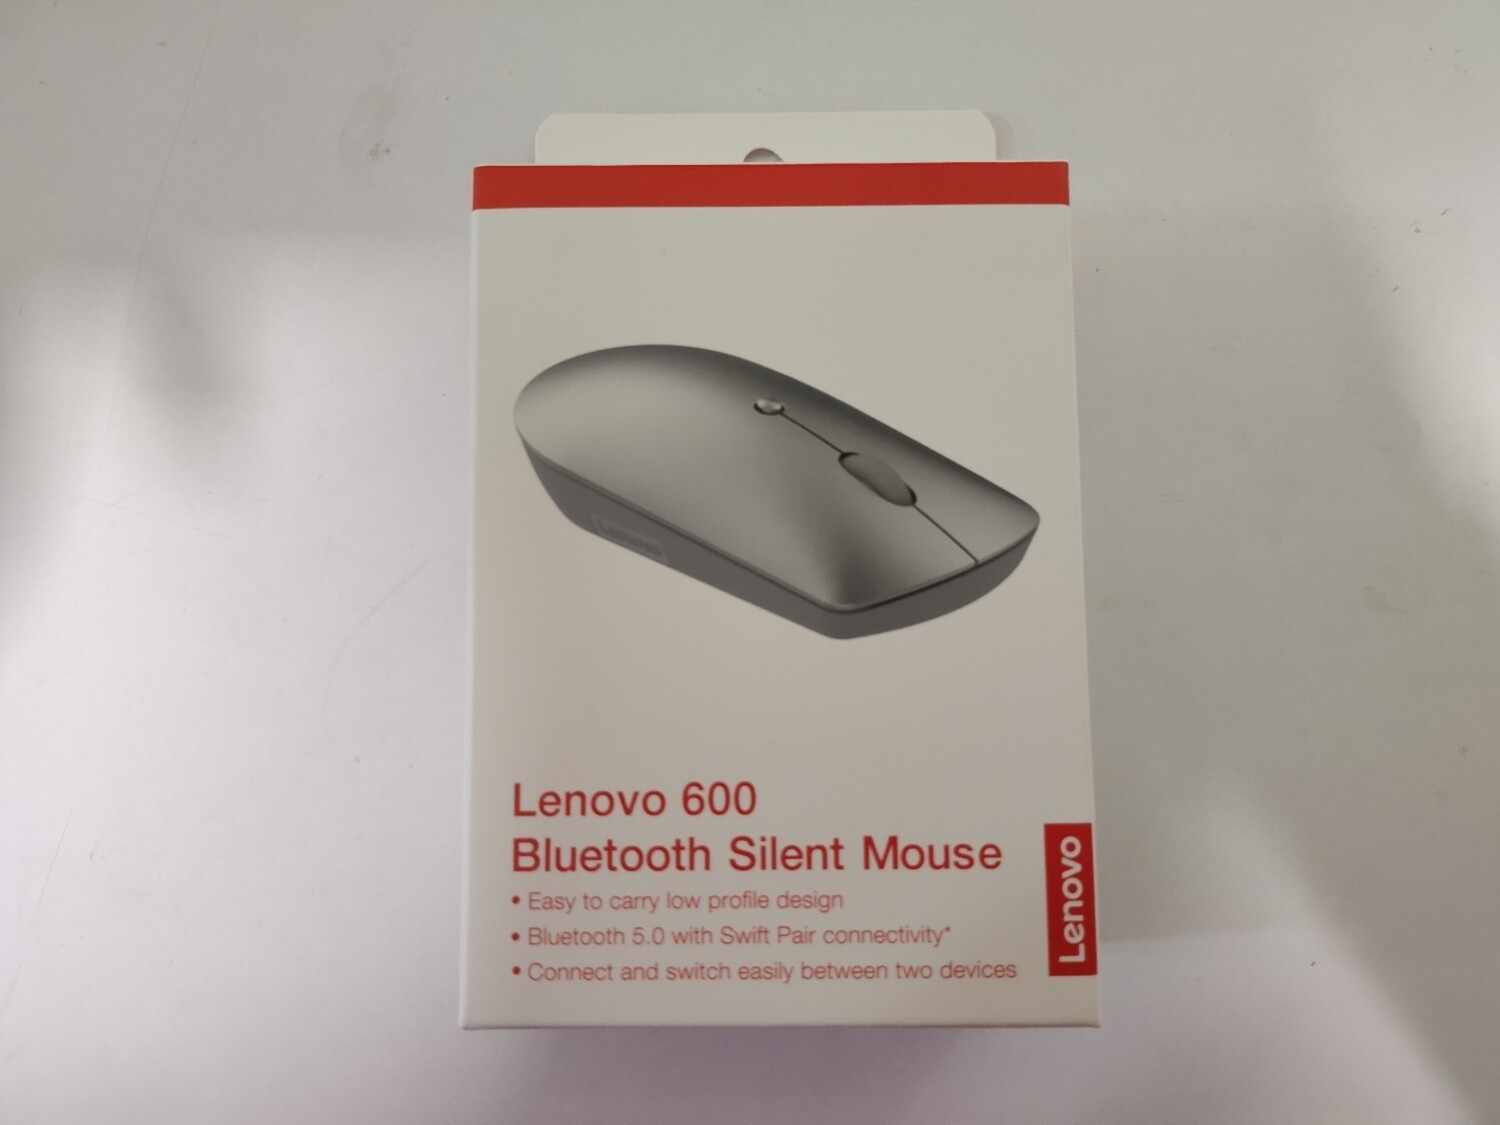 Lenovo 600 Bluetooth Silent Mouse – Rs.1550 – LT Online Store